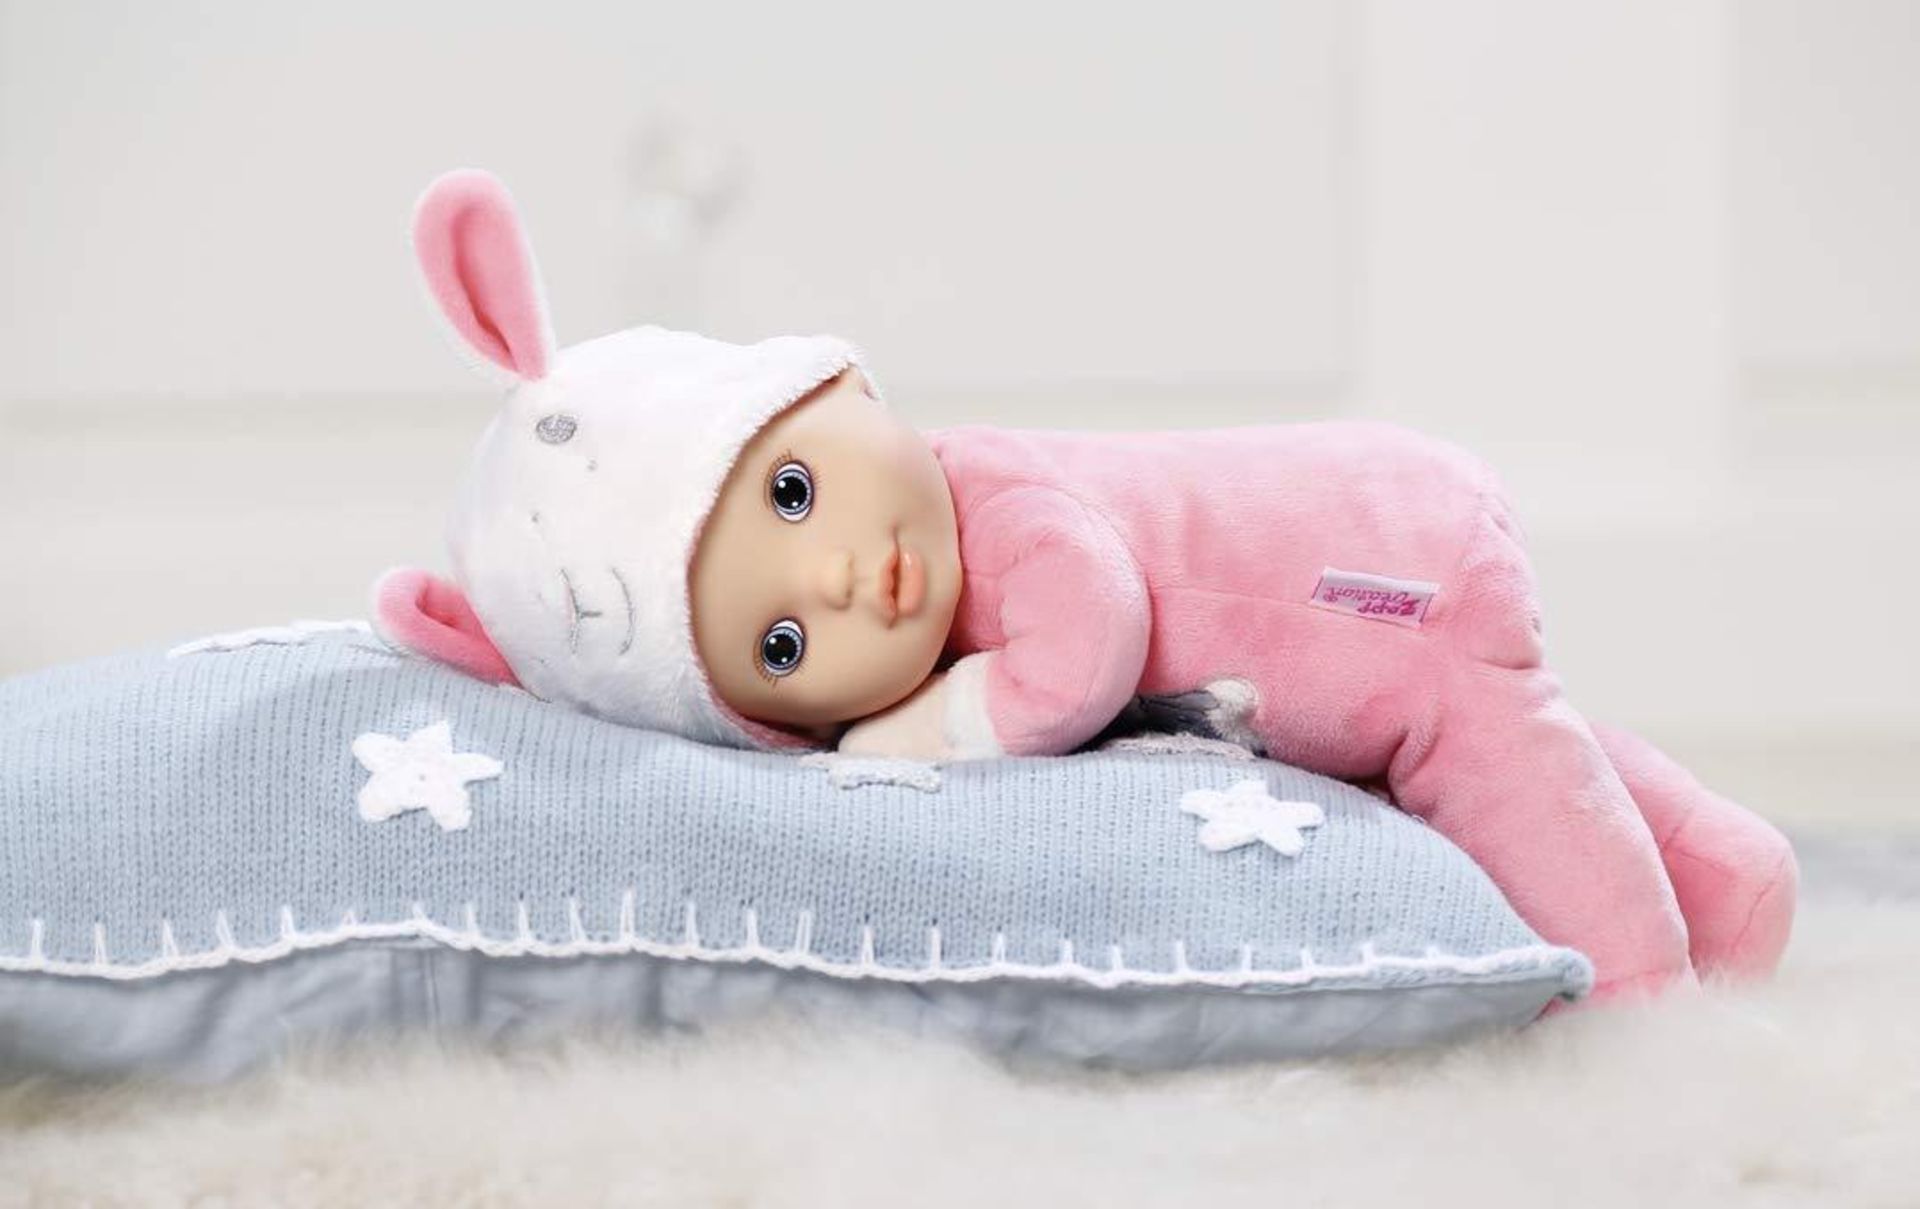 Baby Annabell Newborn Doll £10.00 RRP - Image 2 of 6